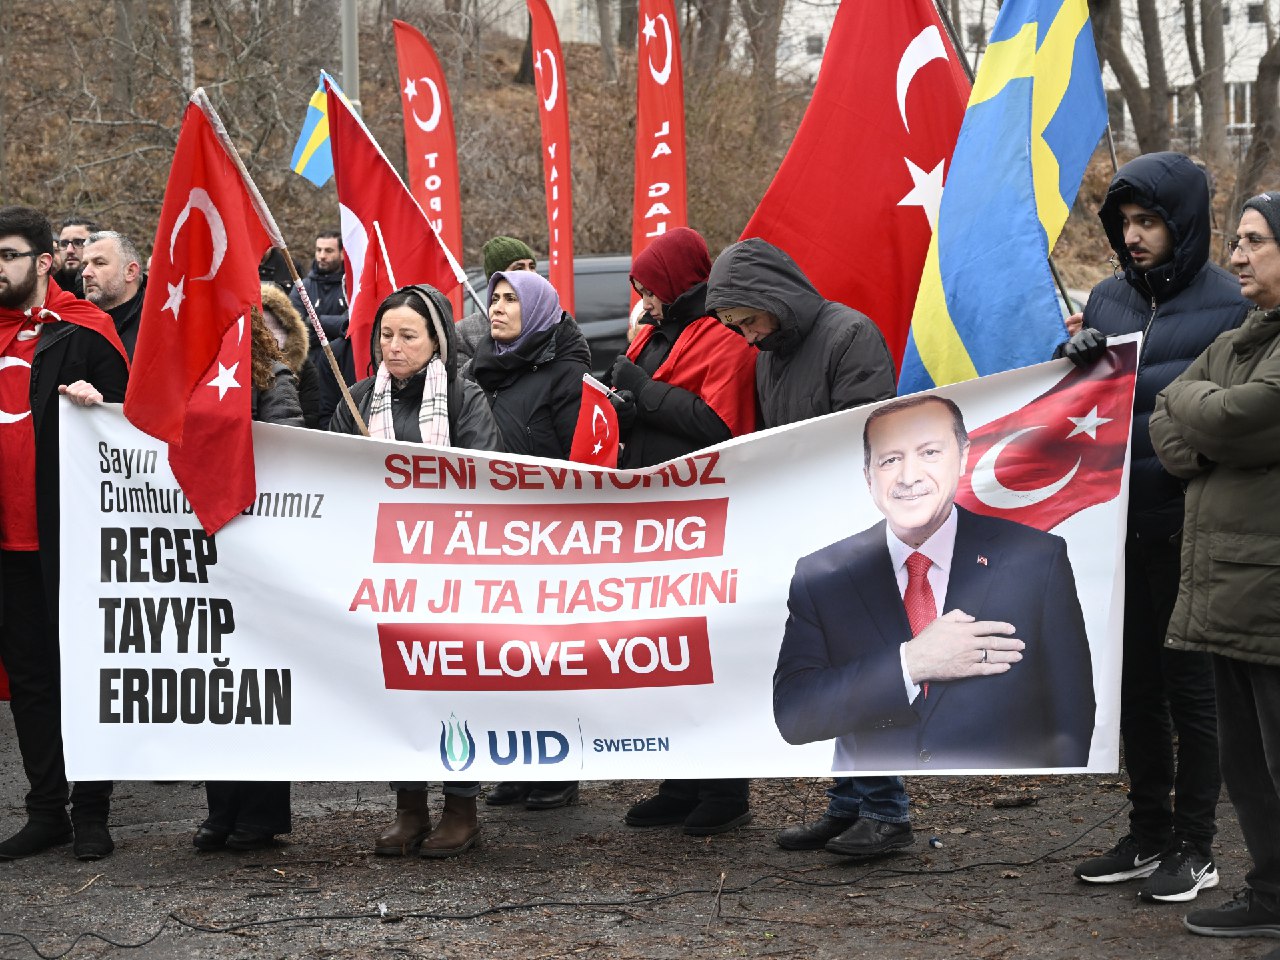 Turkey Condemned Far-Right Politician Burning a Quran during an Islamophobic Protest in Stockholm, Sweden - 23 January 2023